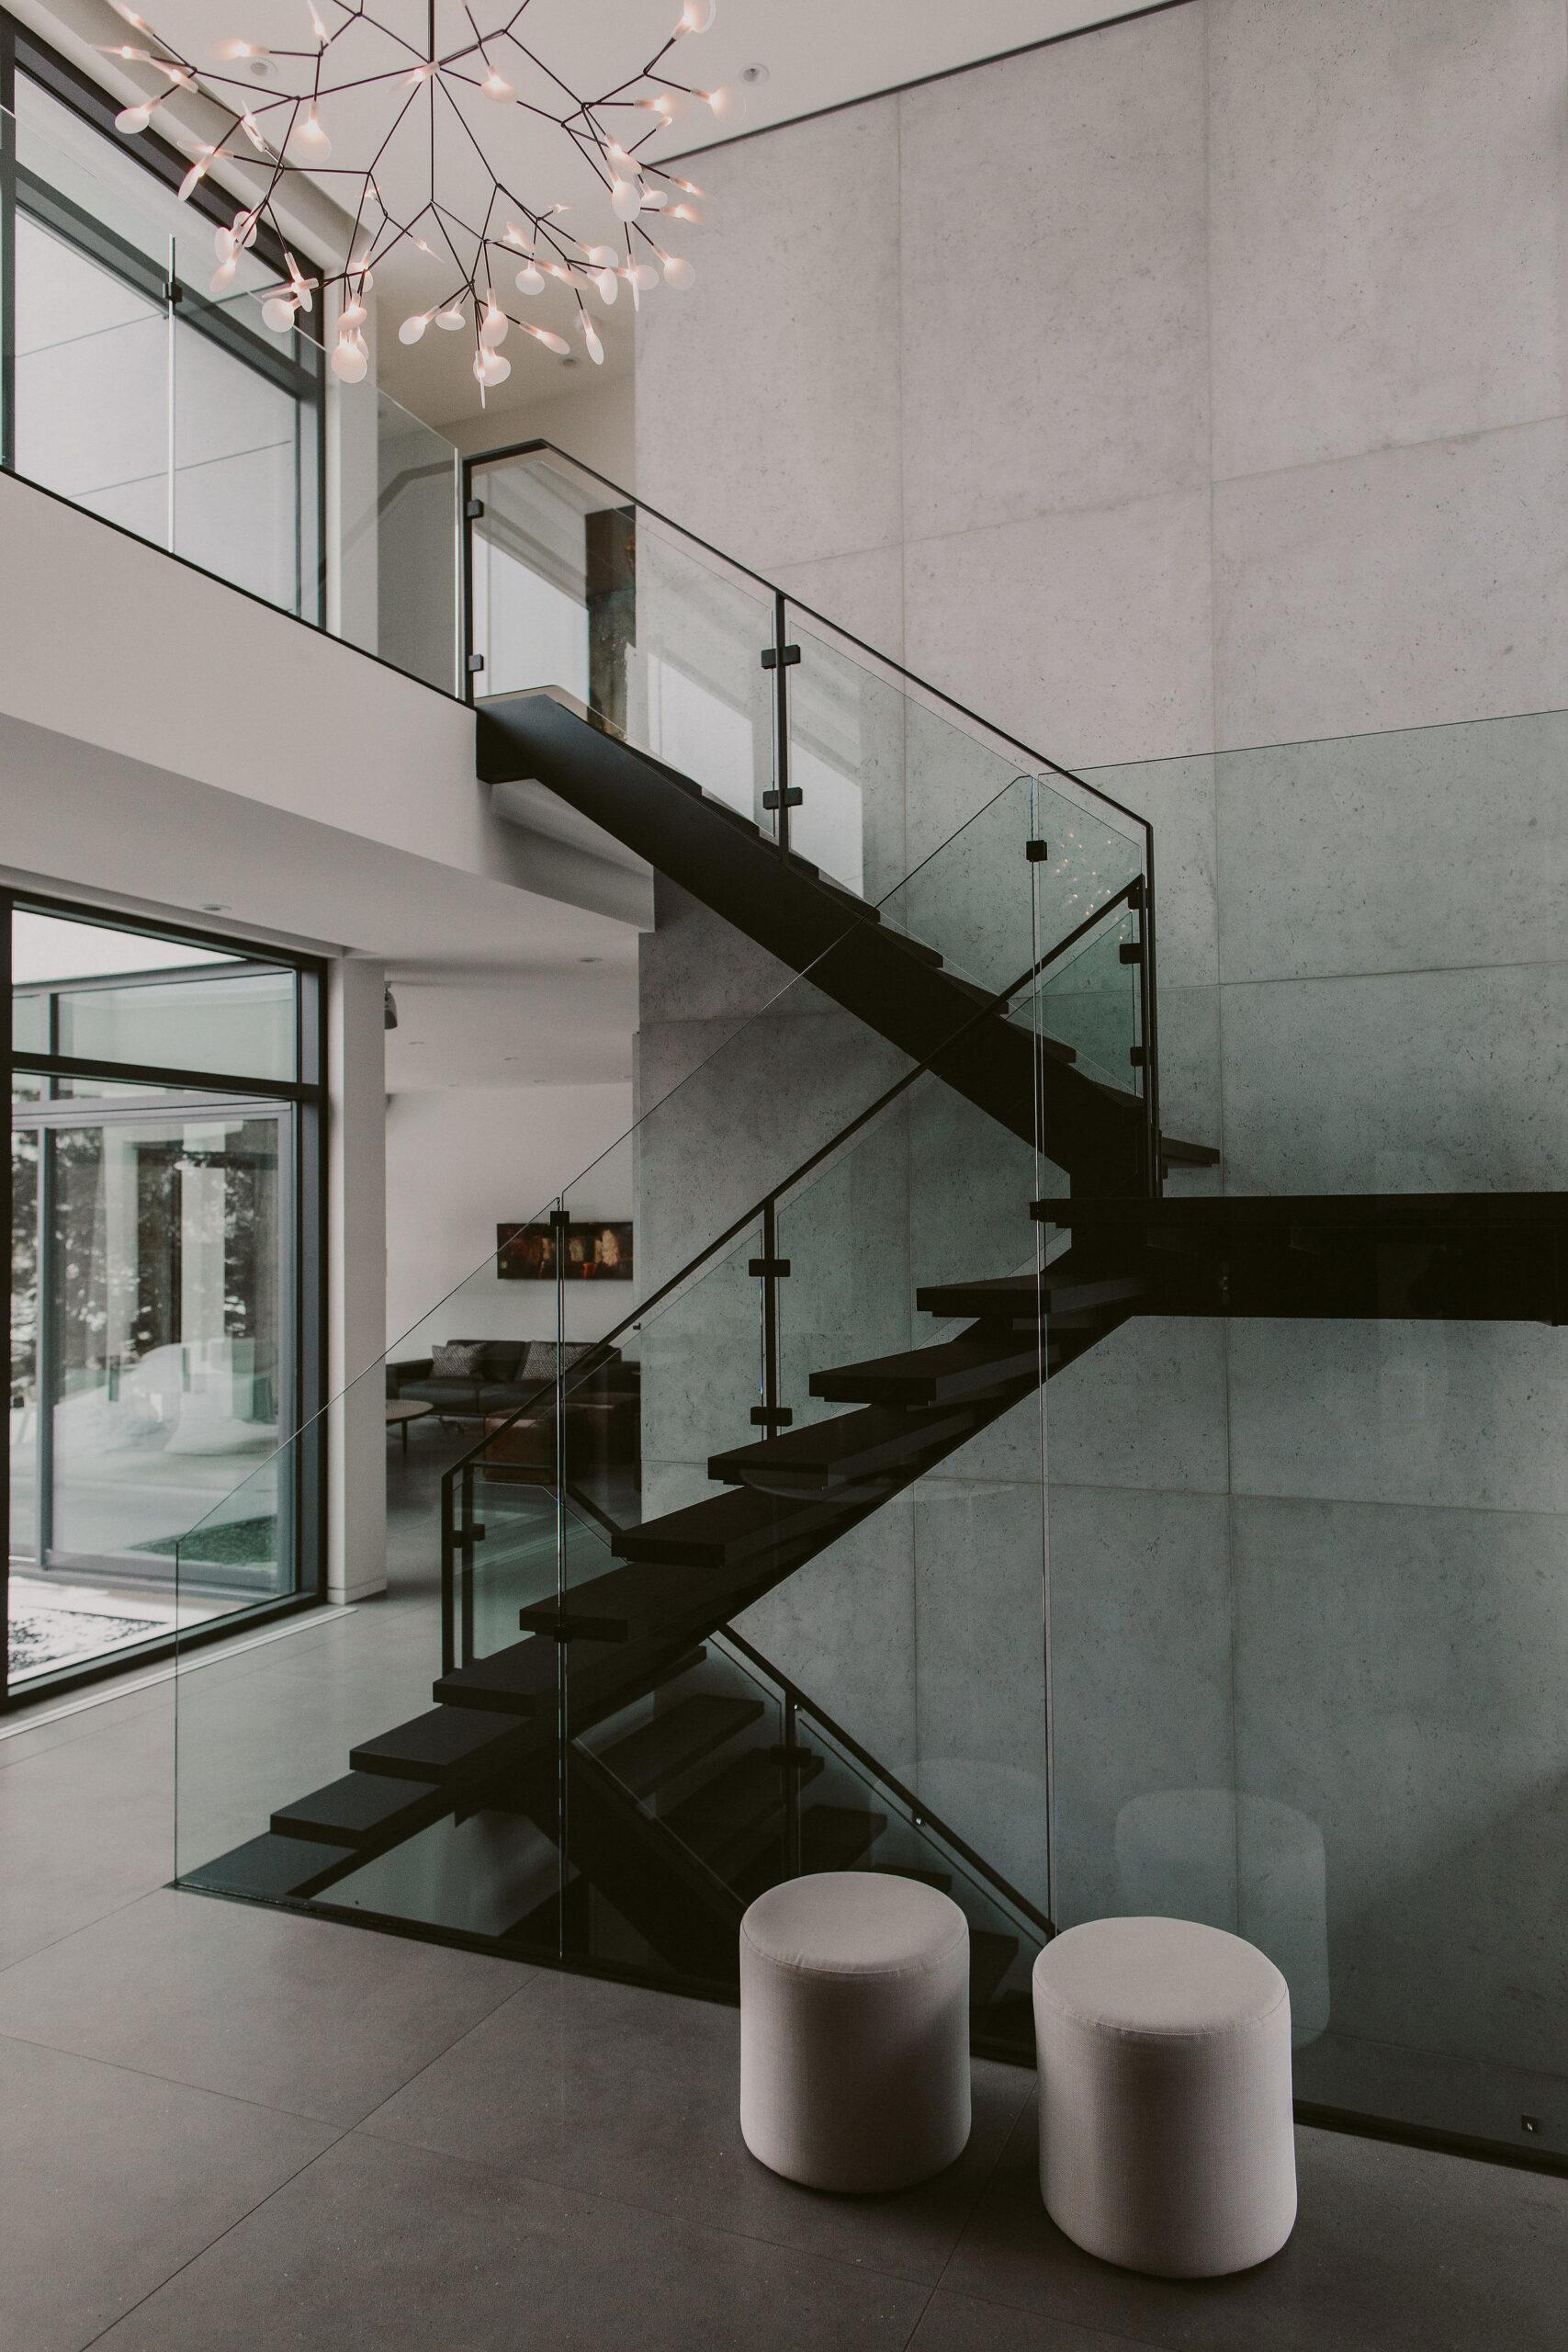 A staircase in a home with its background wall utilizing Dekko’s lightweight concrete cladding.